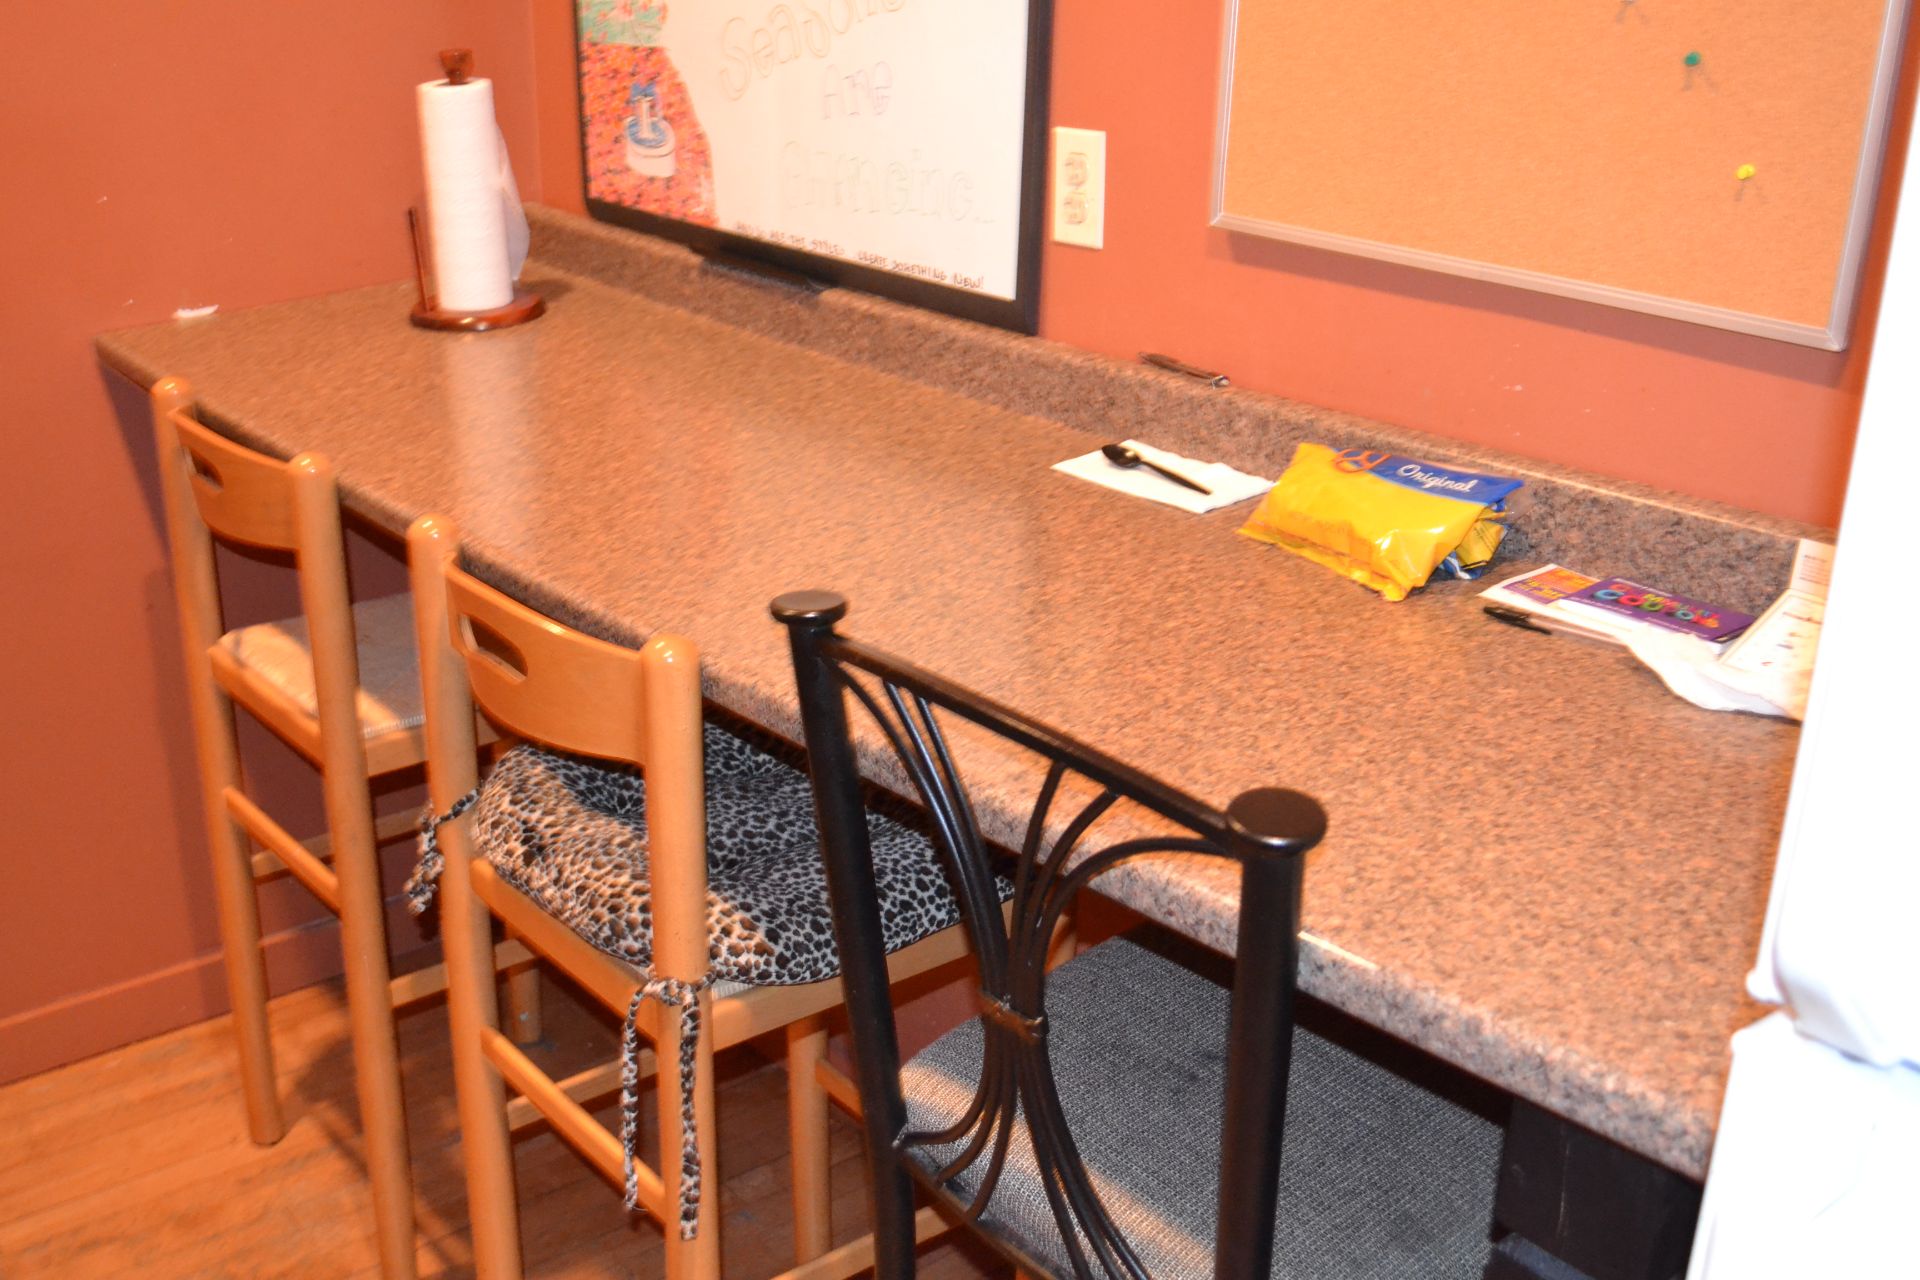 Contents of Breakroom: Fridge, Countertop, Table, Chairs & microwave - Image 2 of 4